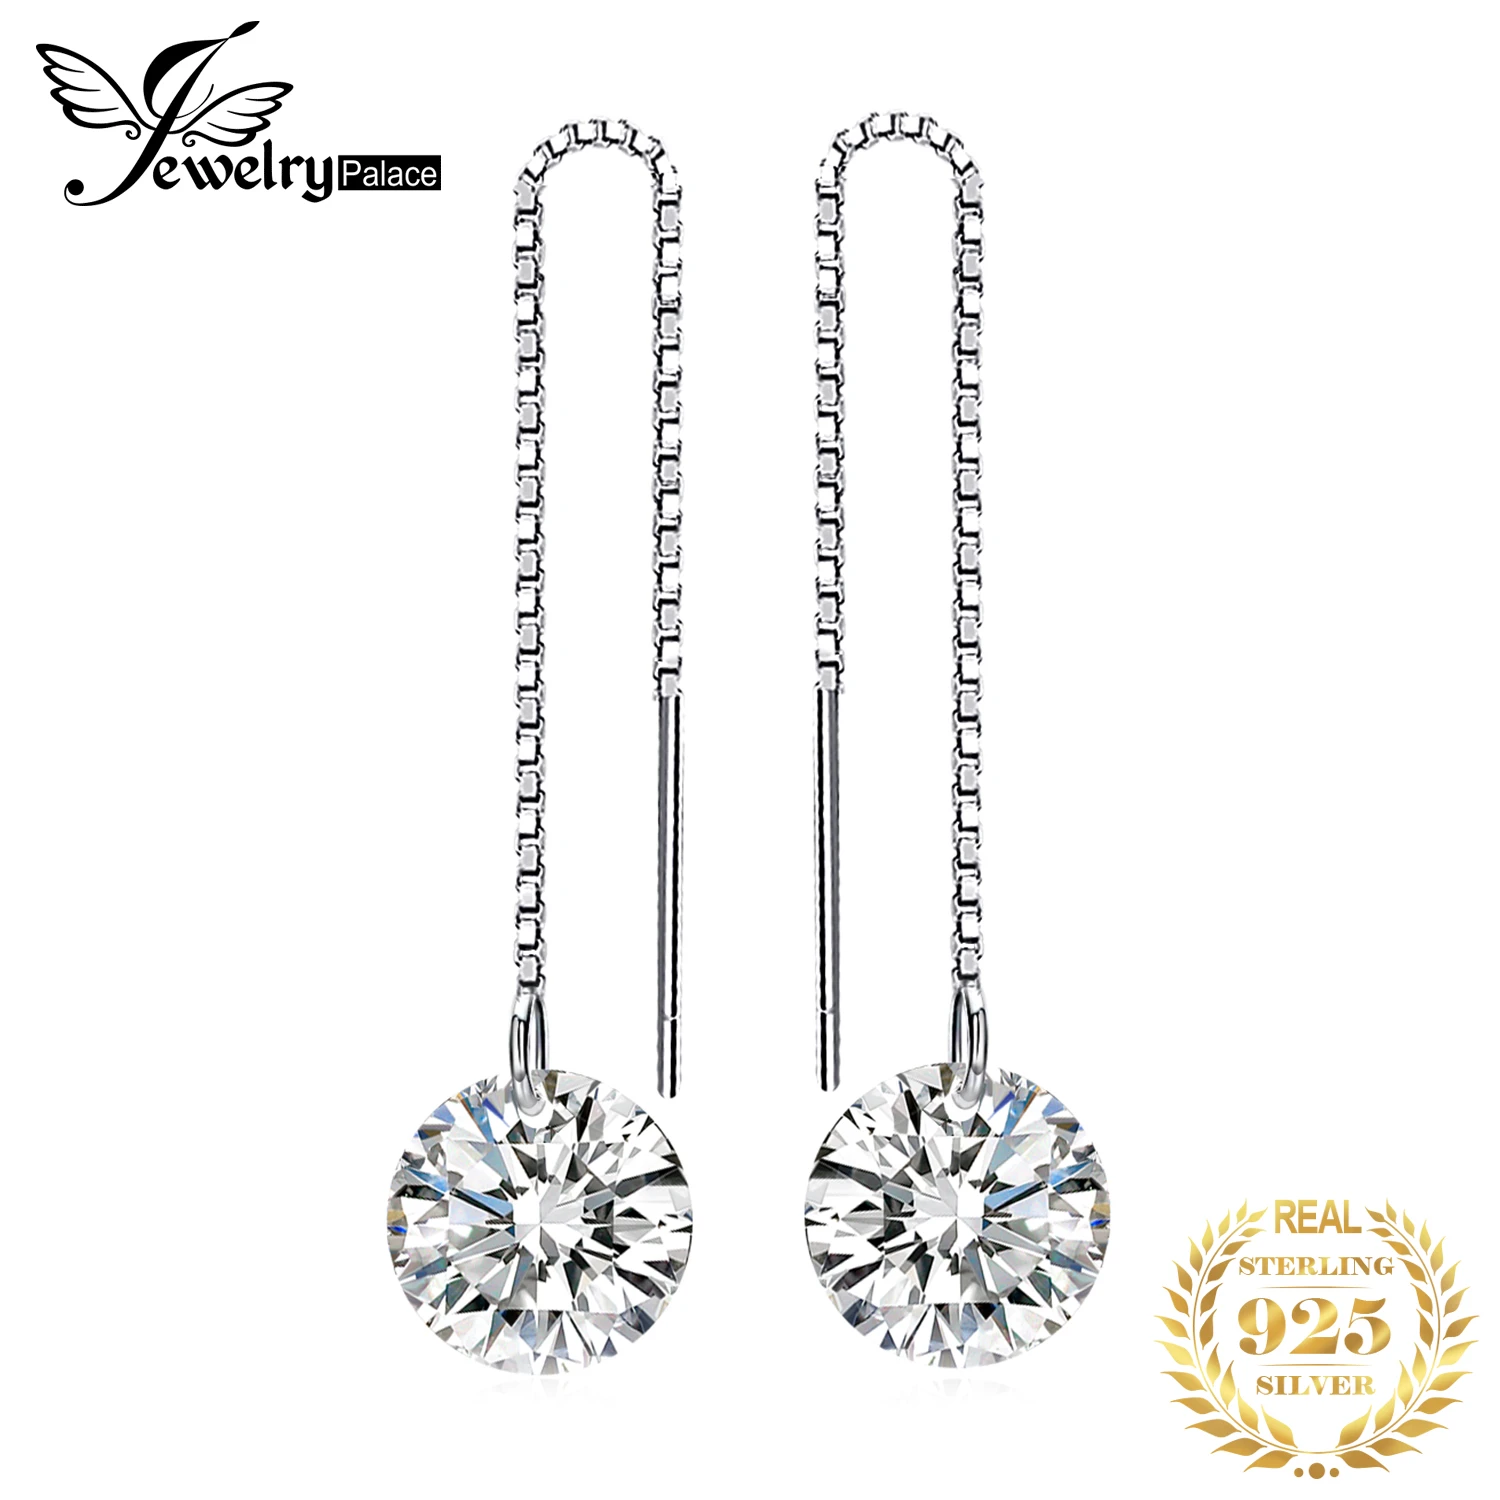 JewelryPalace 925 Sterling Silver Earrings Cubic Zirconia Simulated Diamond Long Drop Dangle Thread Earings for Women Girl 2020